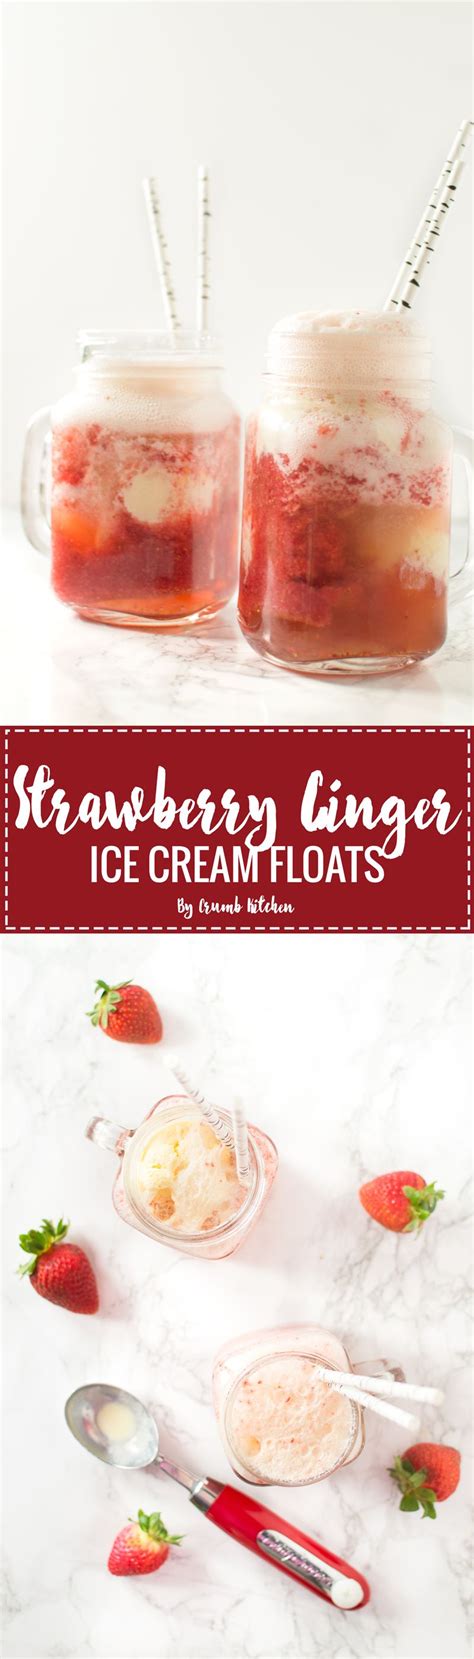 Strawberry Ginger Ice Cream Floats Crumb Kitchen Recipe Easy